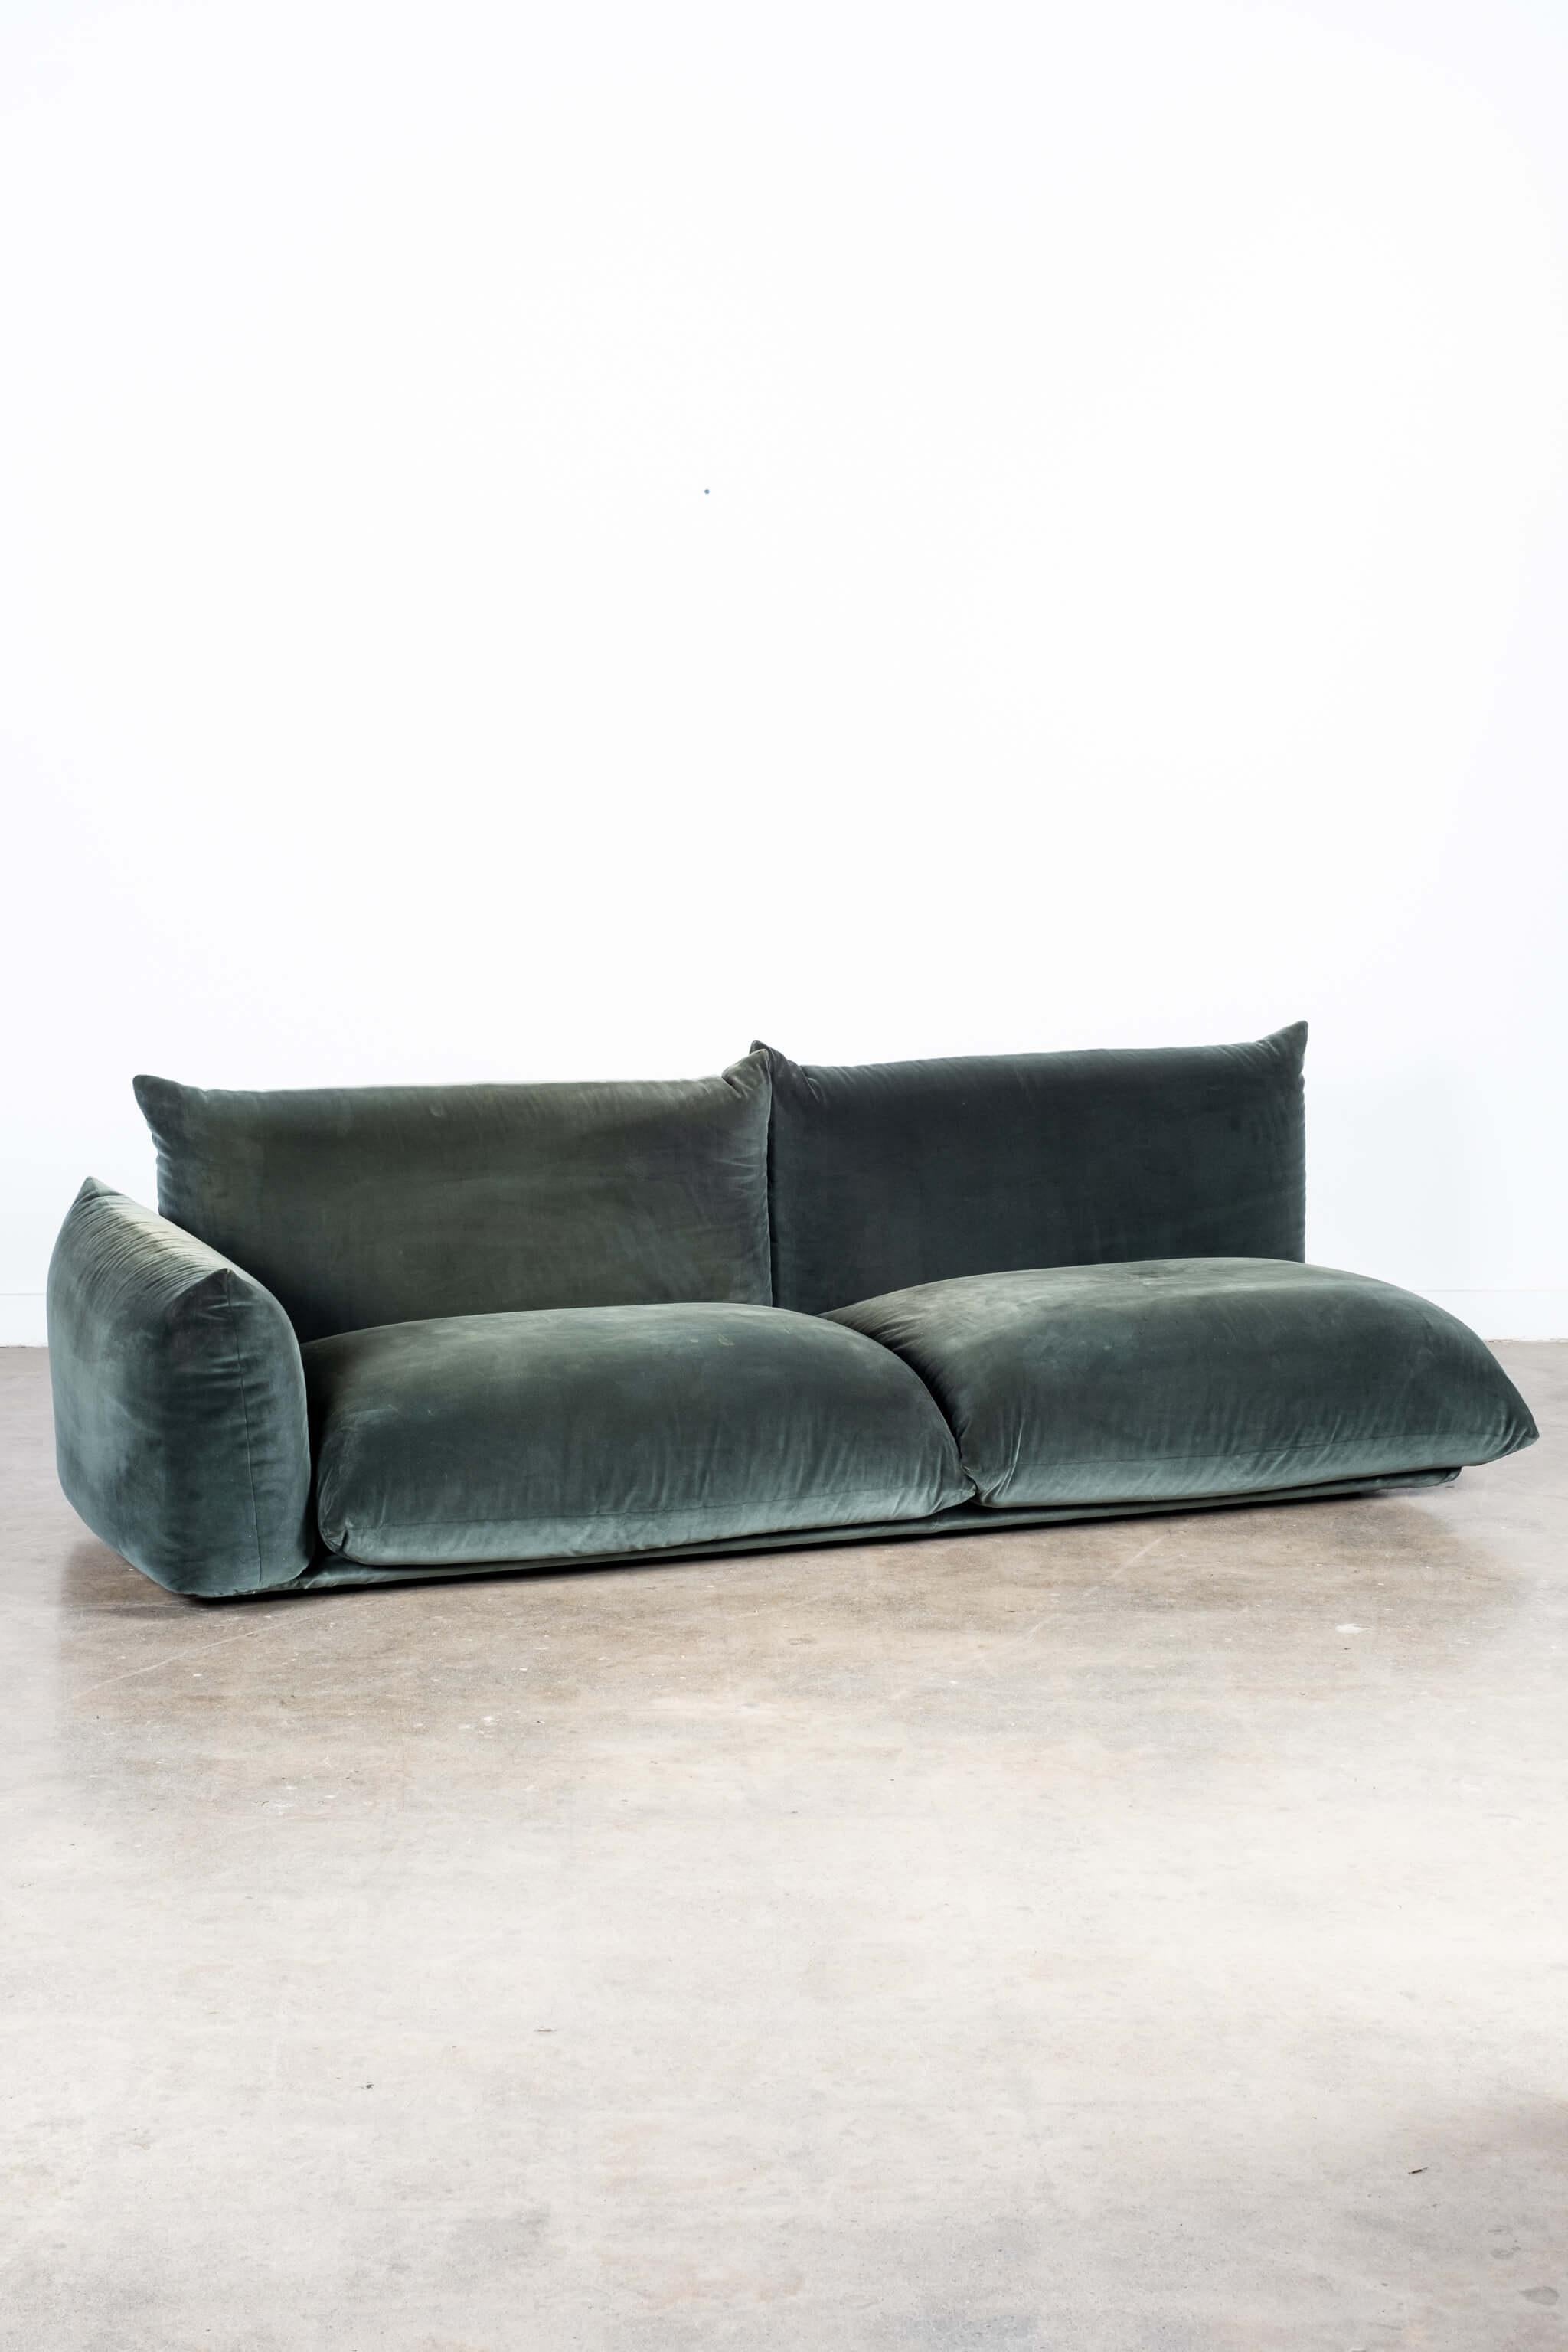 Marenco 1 Arm 2-Seater Sofa in Green Velvet by Mario Marenco For Sale 3